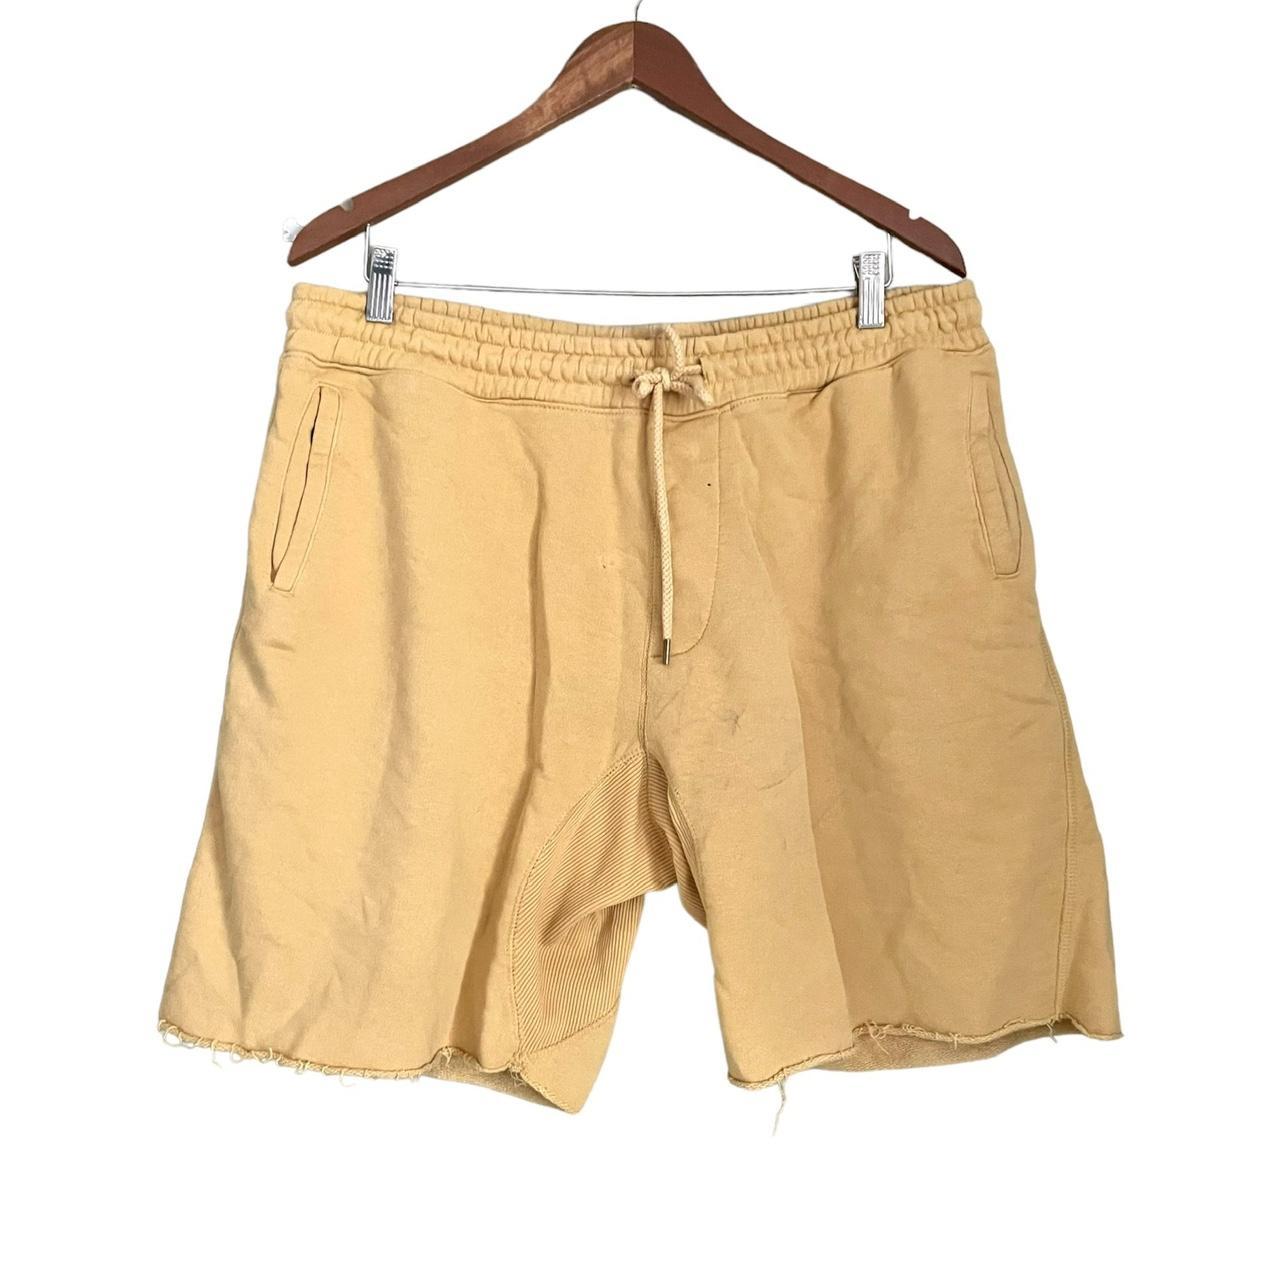 Urban Outfitters Men's Yellow Shorts | Depop